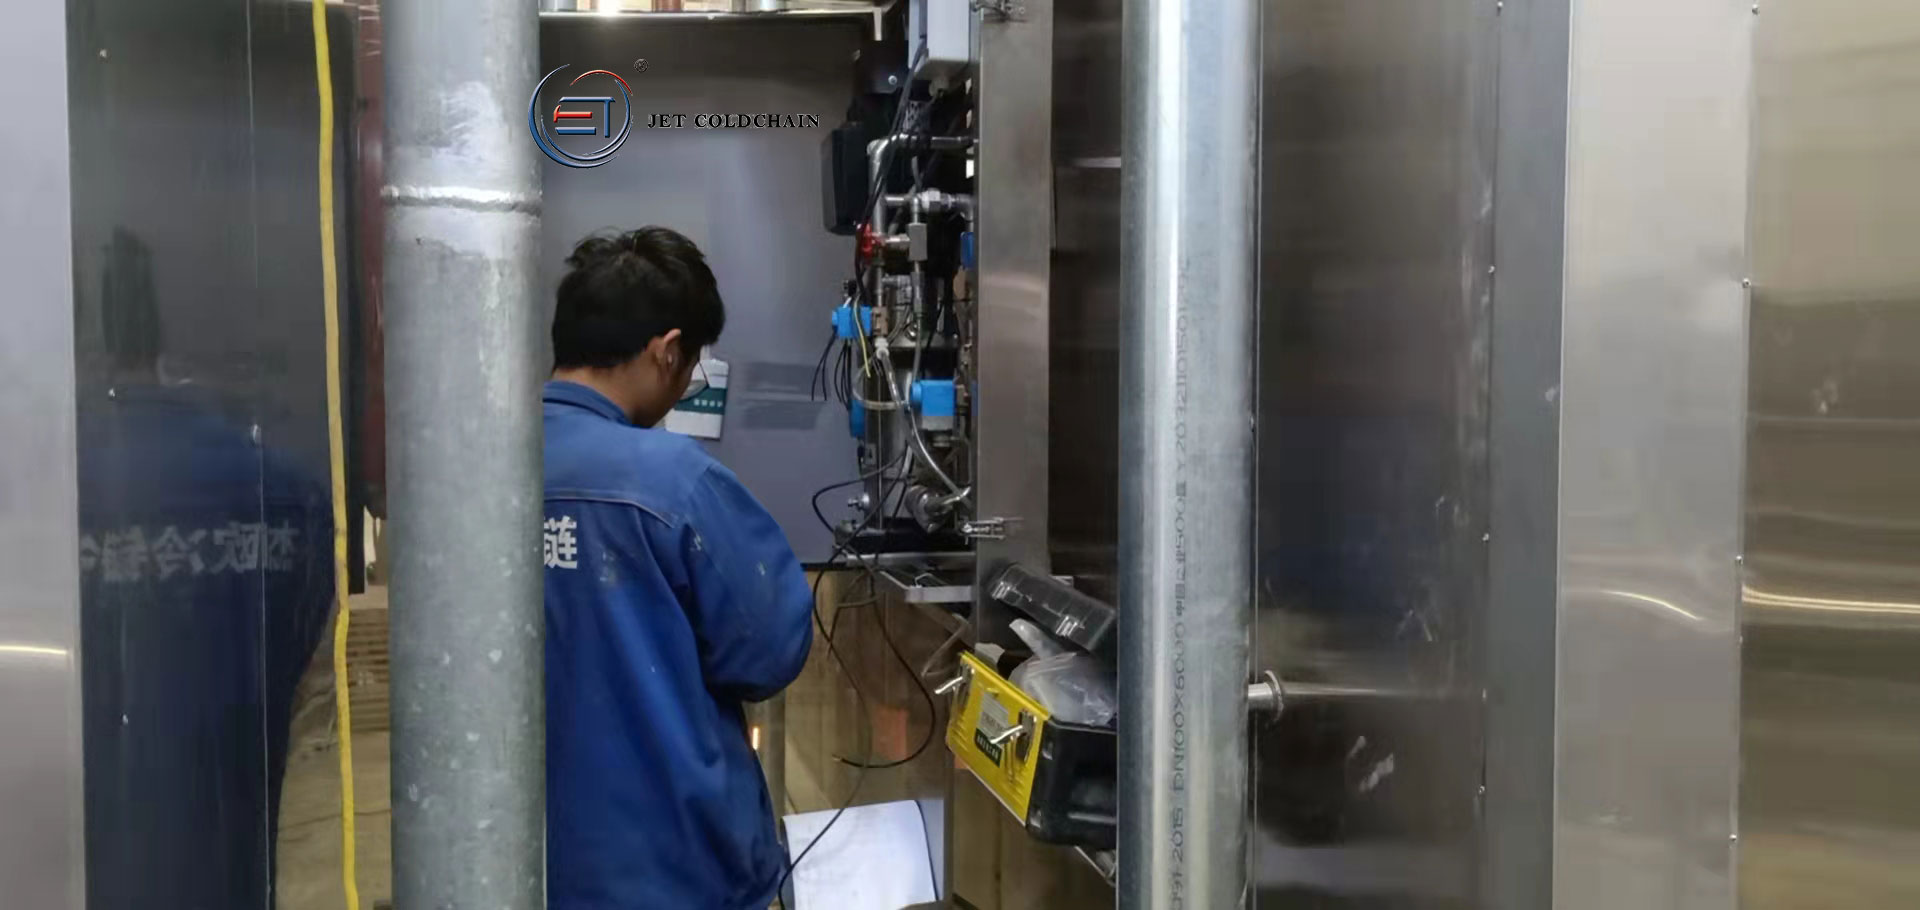 A new self-stacking spiral freezer is under installation recently